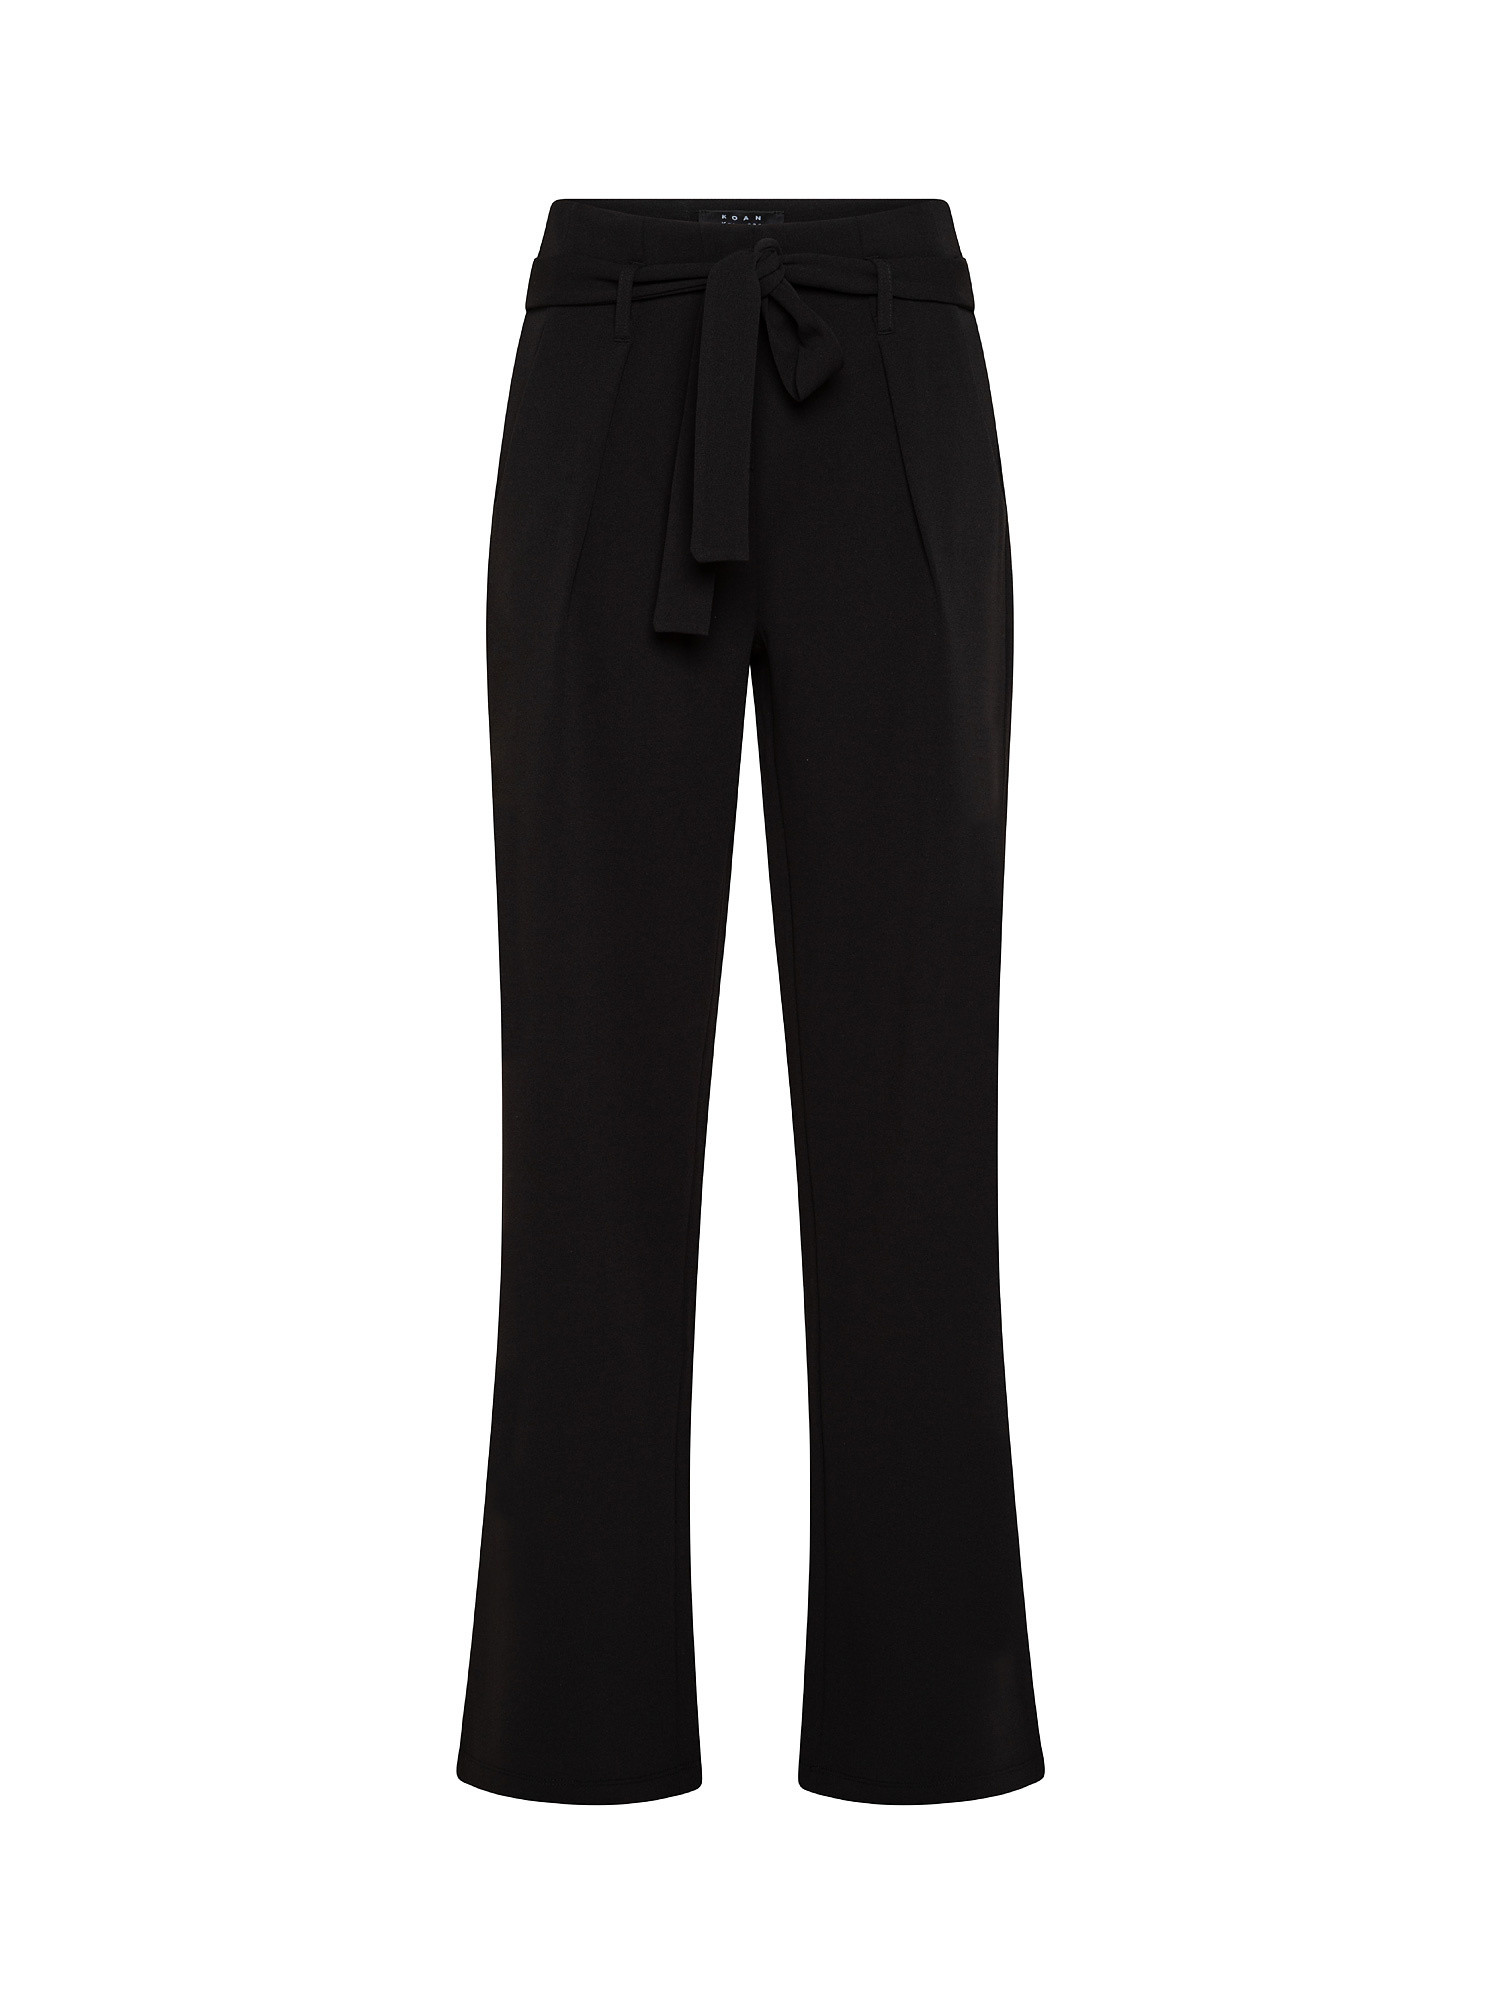 Trousers with belt, Black, large image number 0